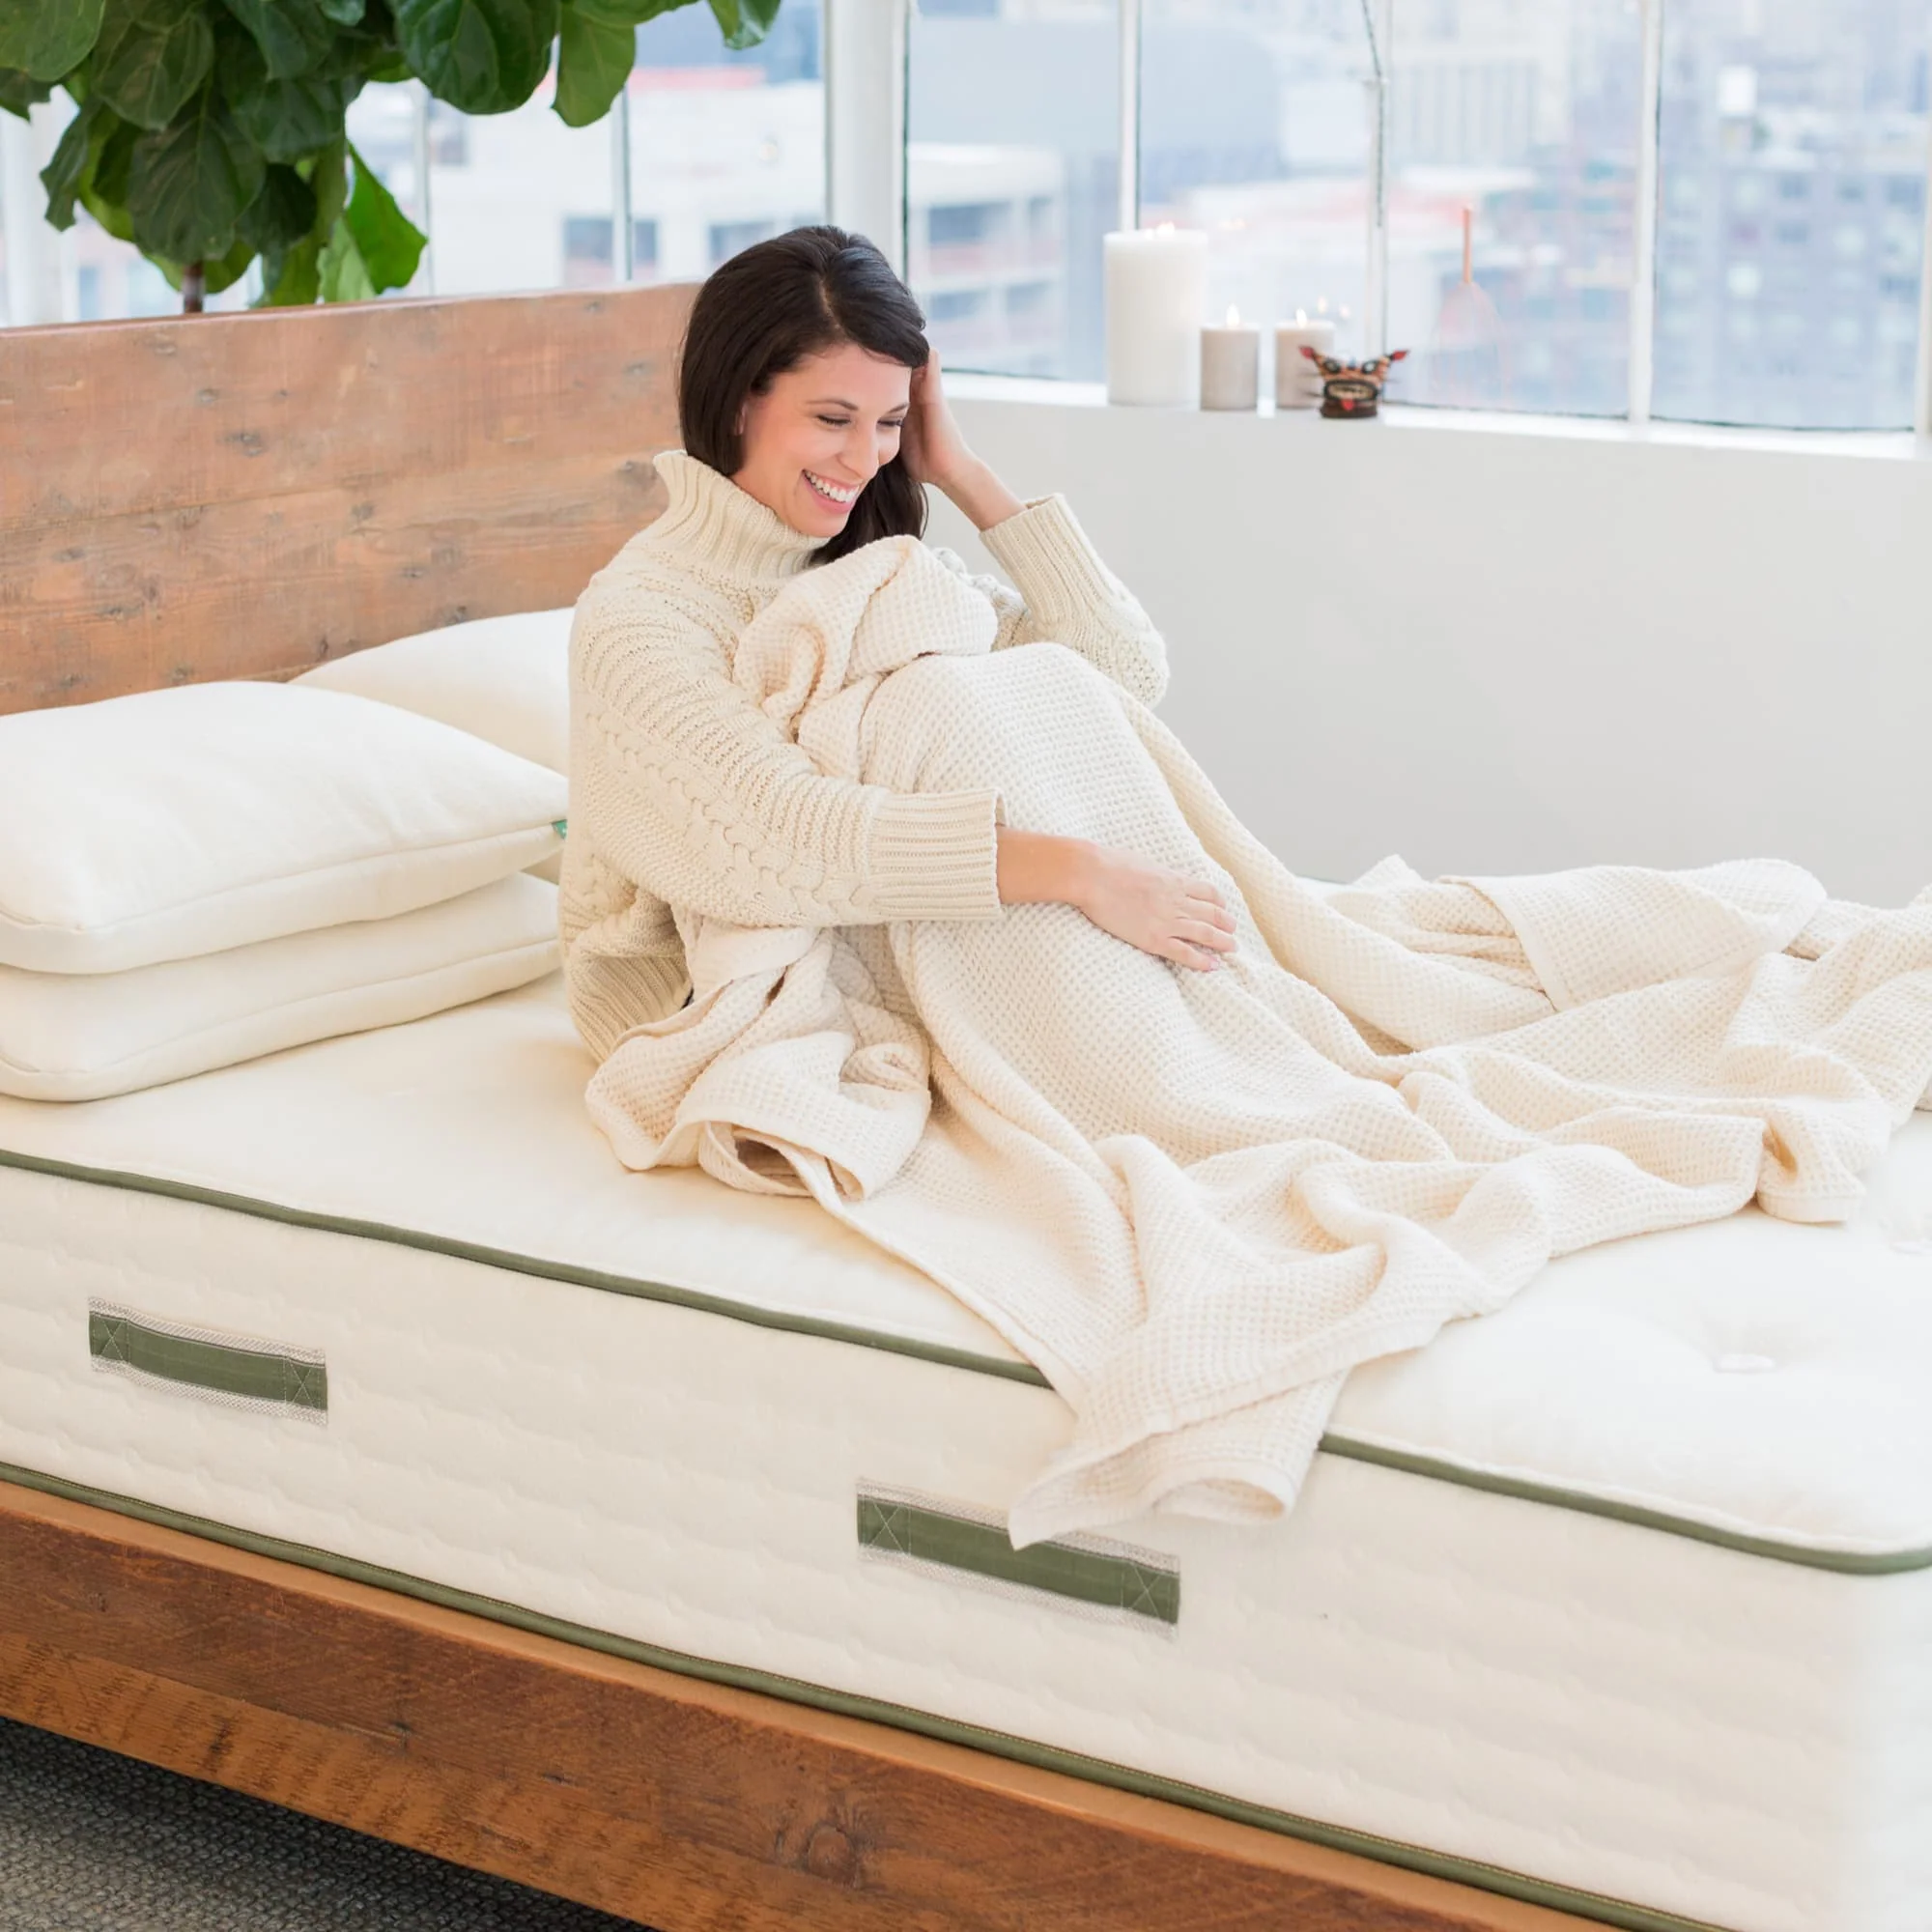 Woman sitting up on eco-freindly Avocado mattress in light-filled high-rise room; wood bedstead and plant visible - photo